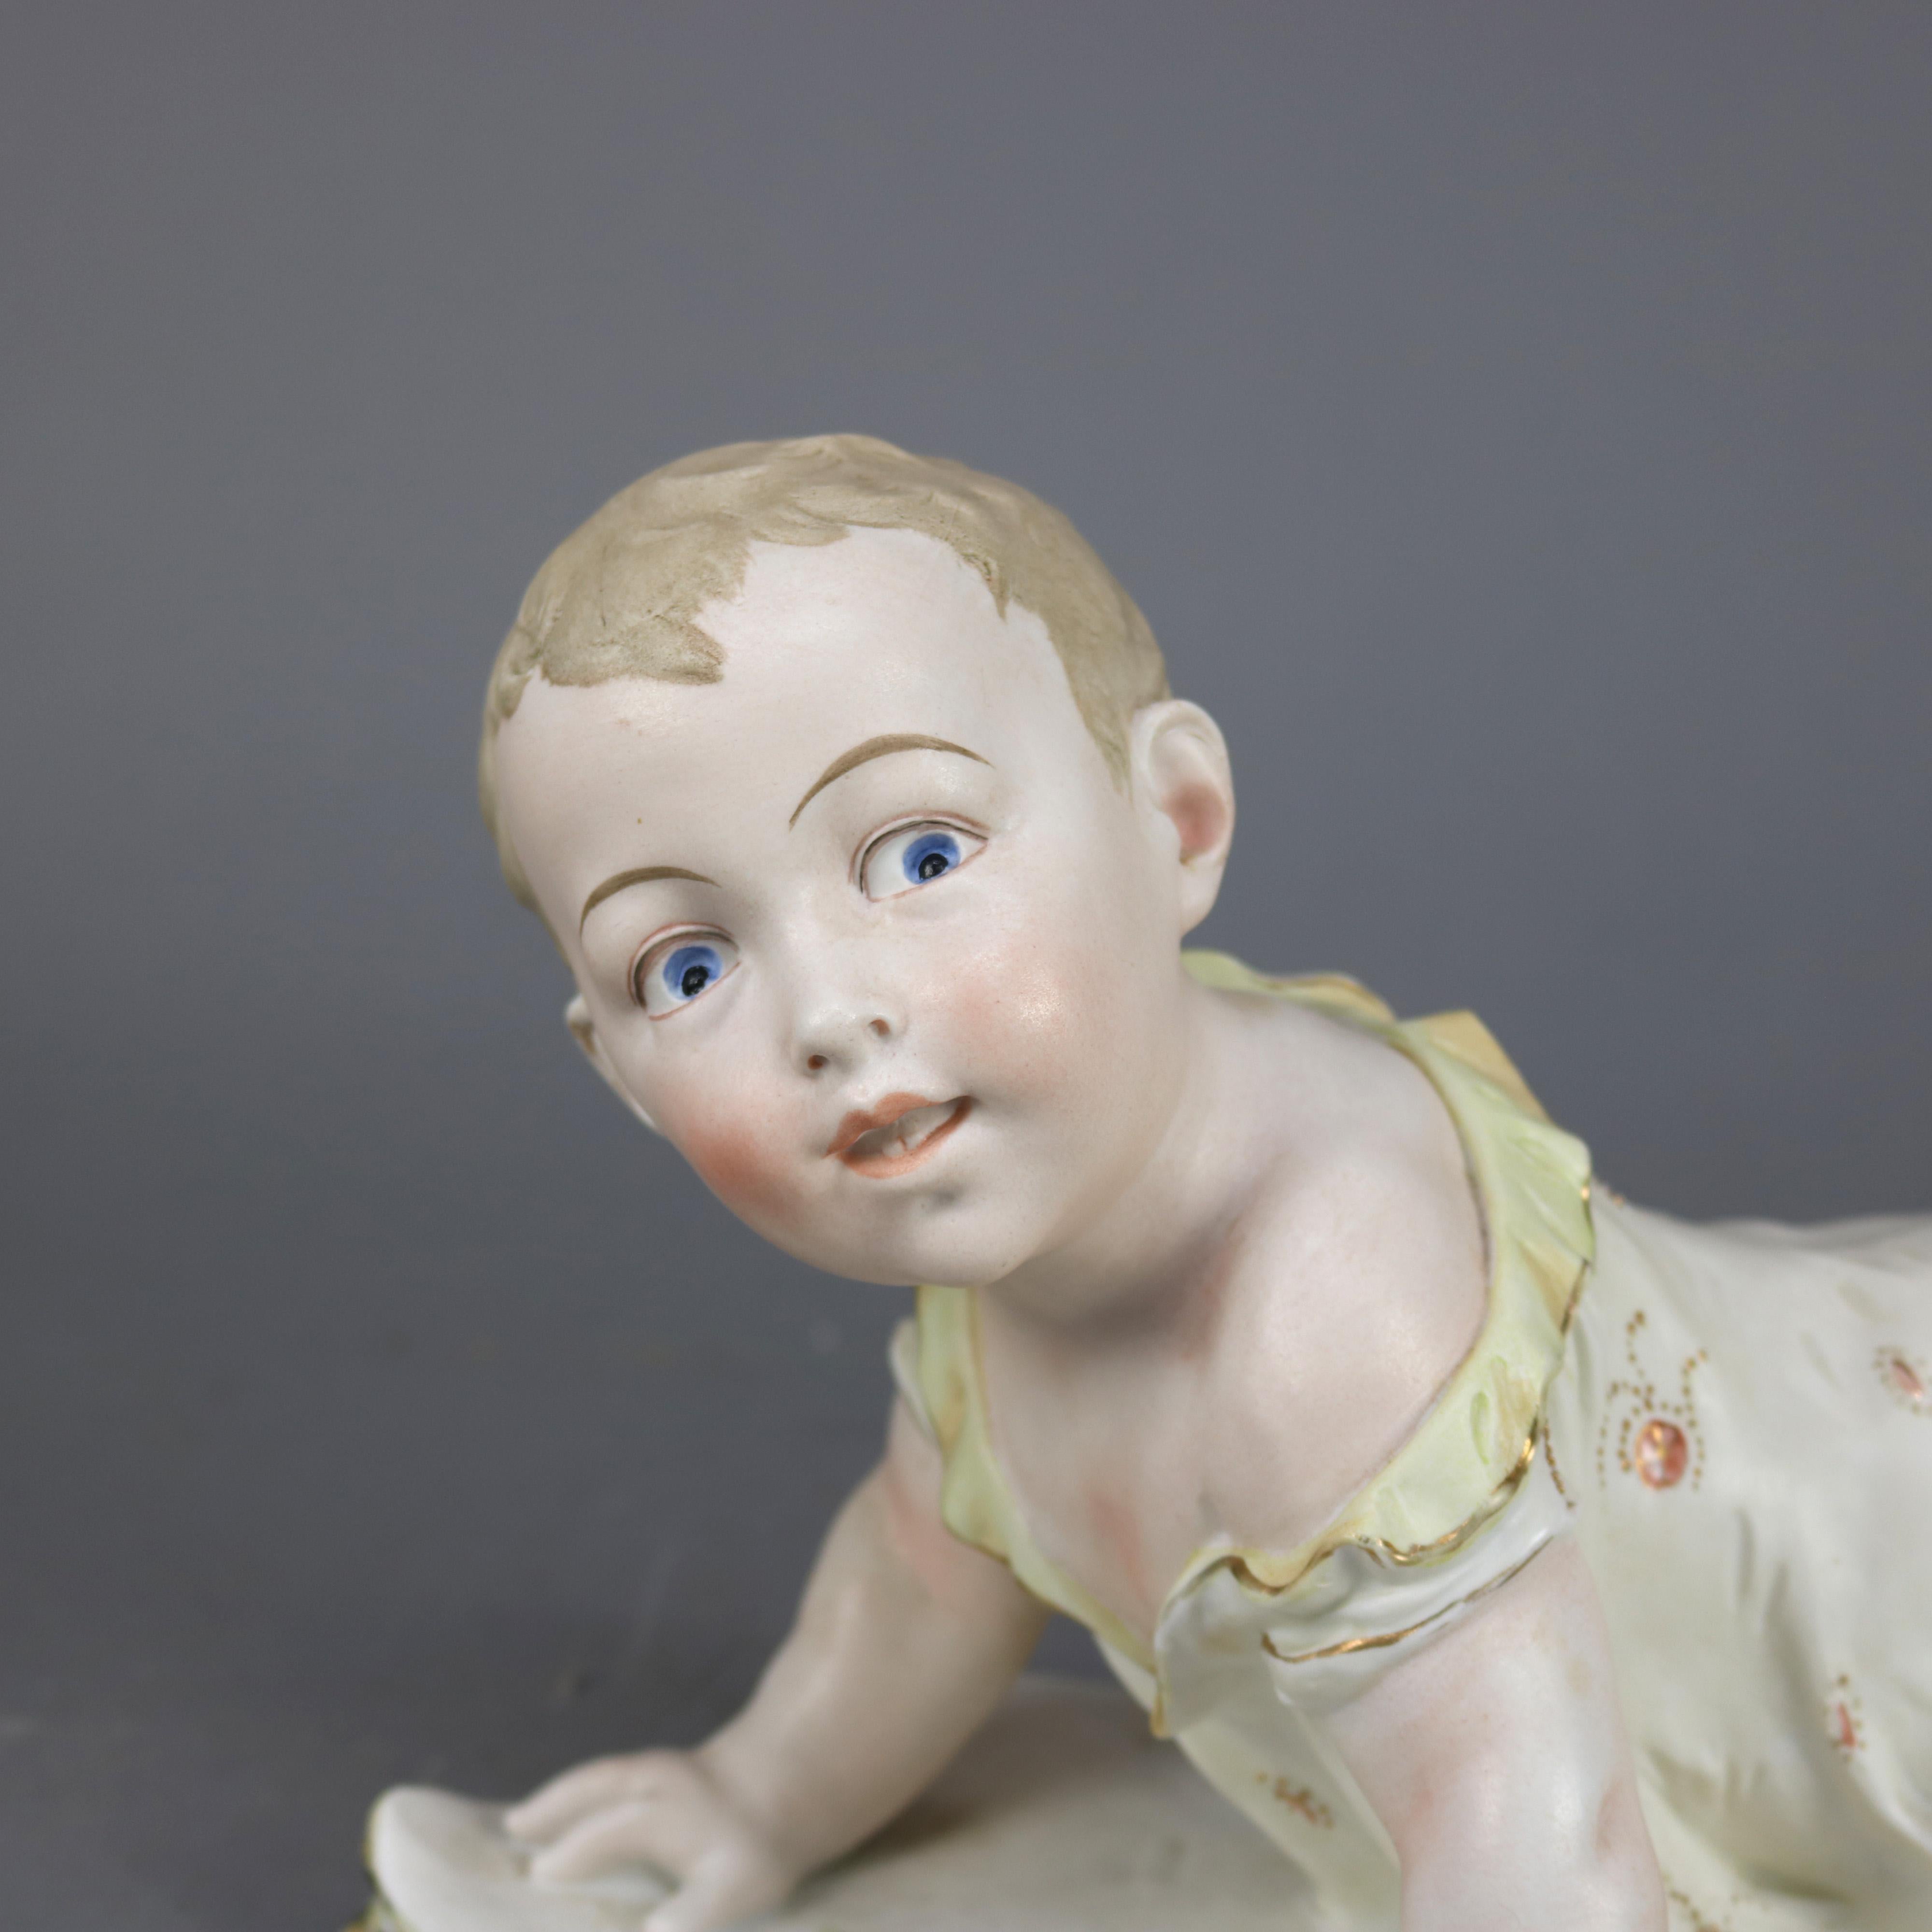 An antique large English bisque porcelain piano baby offers hand painted and gilt baby on blanket or book, circa 1890.

Measures: 8.5